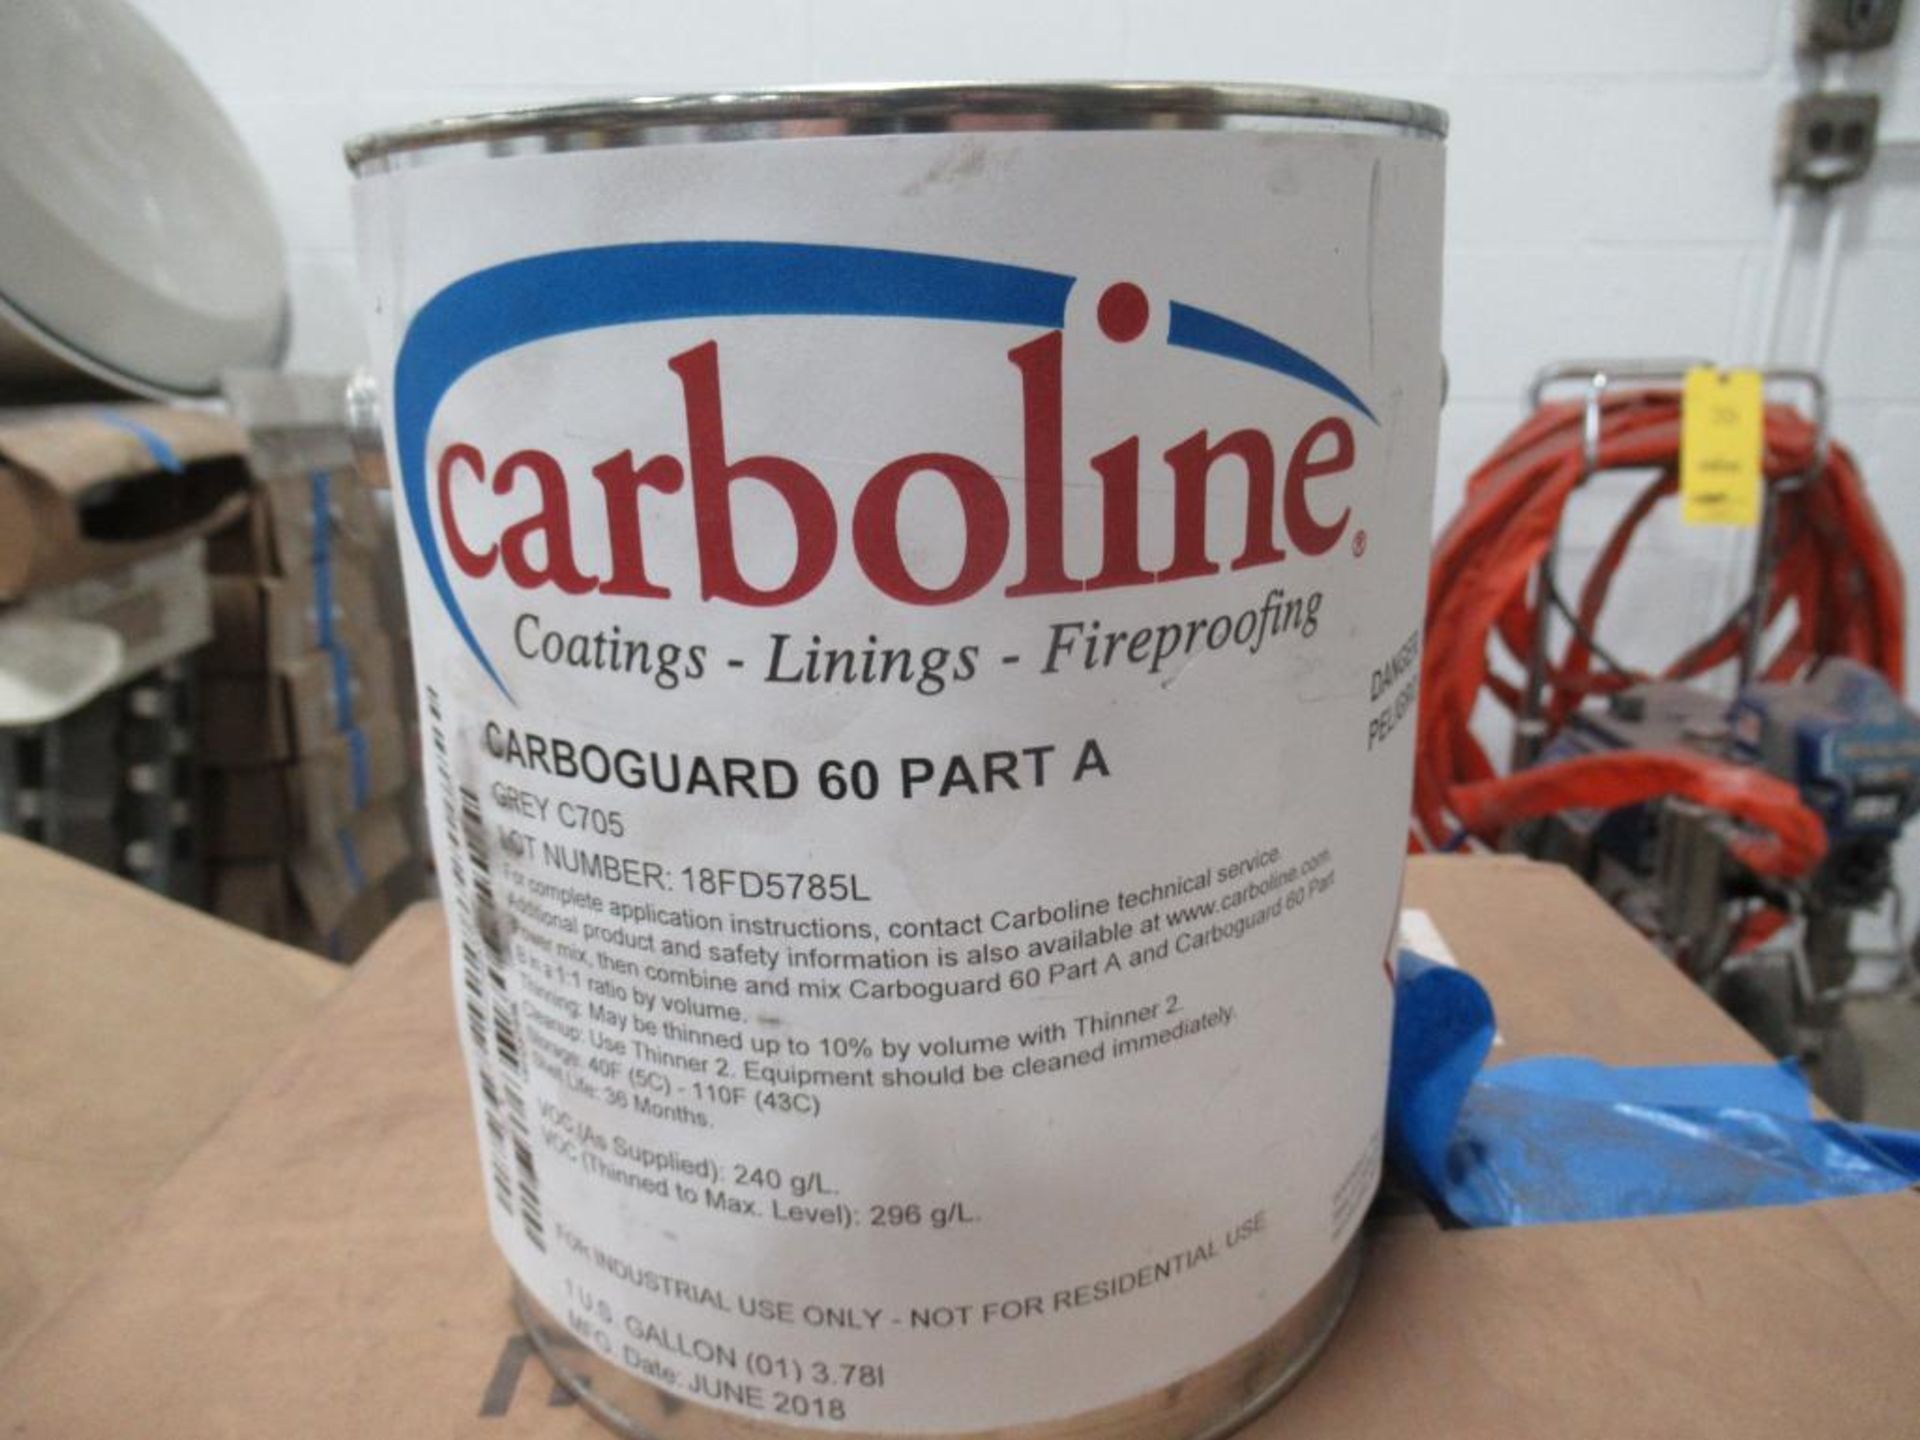 LOT: (10) 5-Gallon Lucas Roof Top Coating & Cases 1 Gallon Carboline Carboguard 60 Part A on Pallet - Image 3 of 3